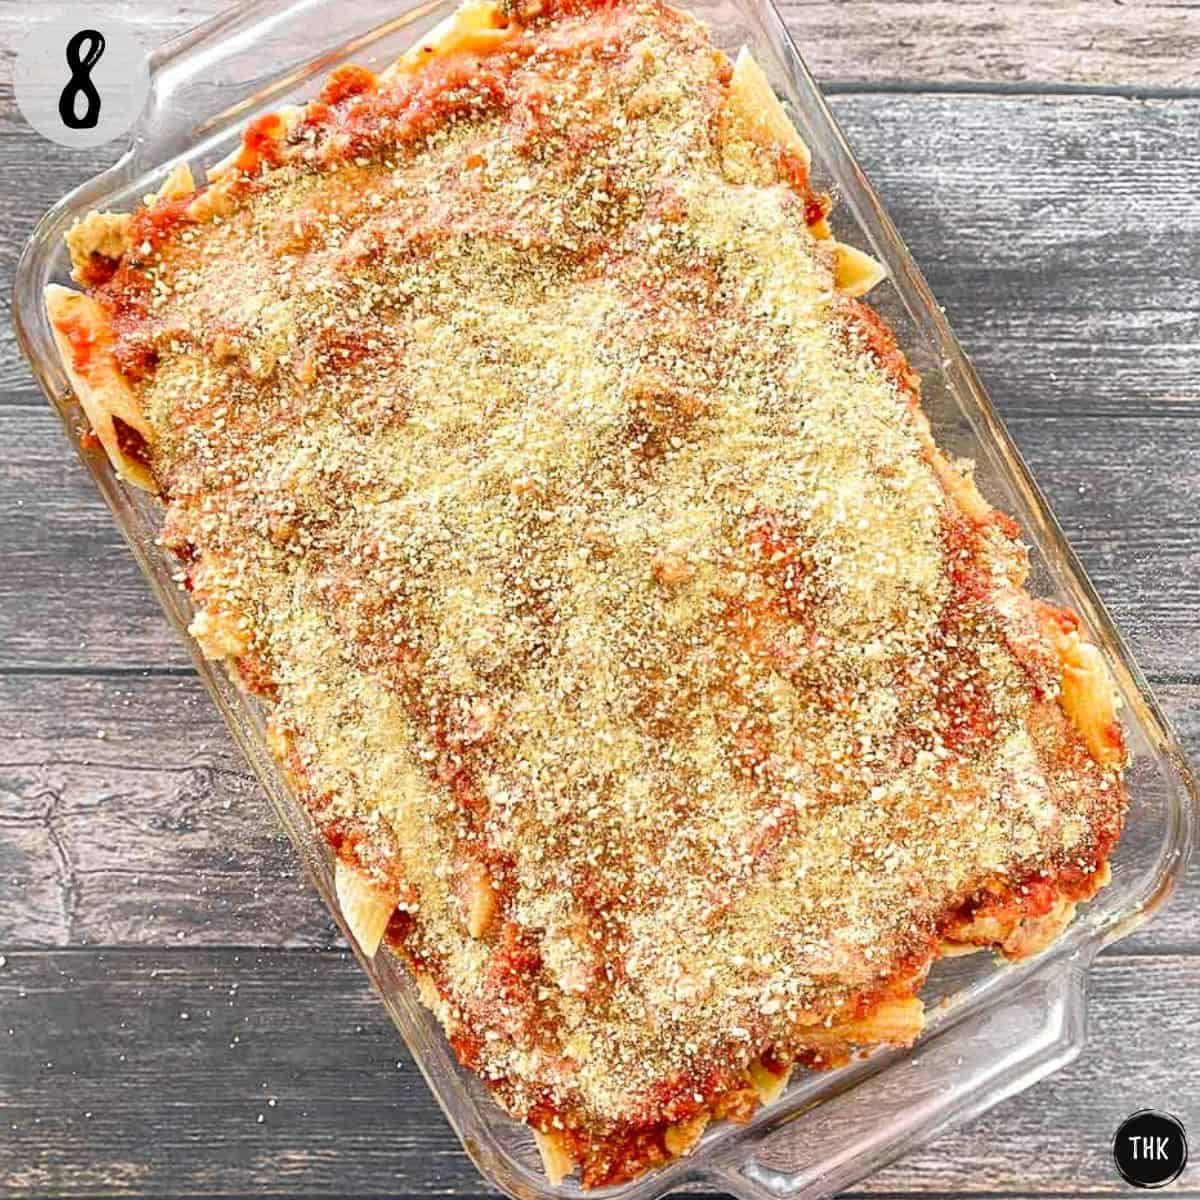 Vegan baked pasta dish in glass tray with parmesan sprinkled on top.